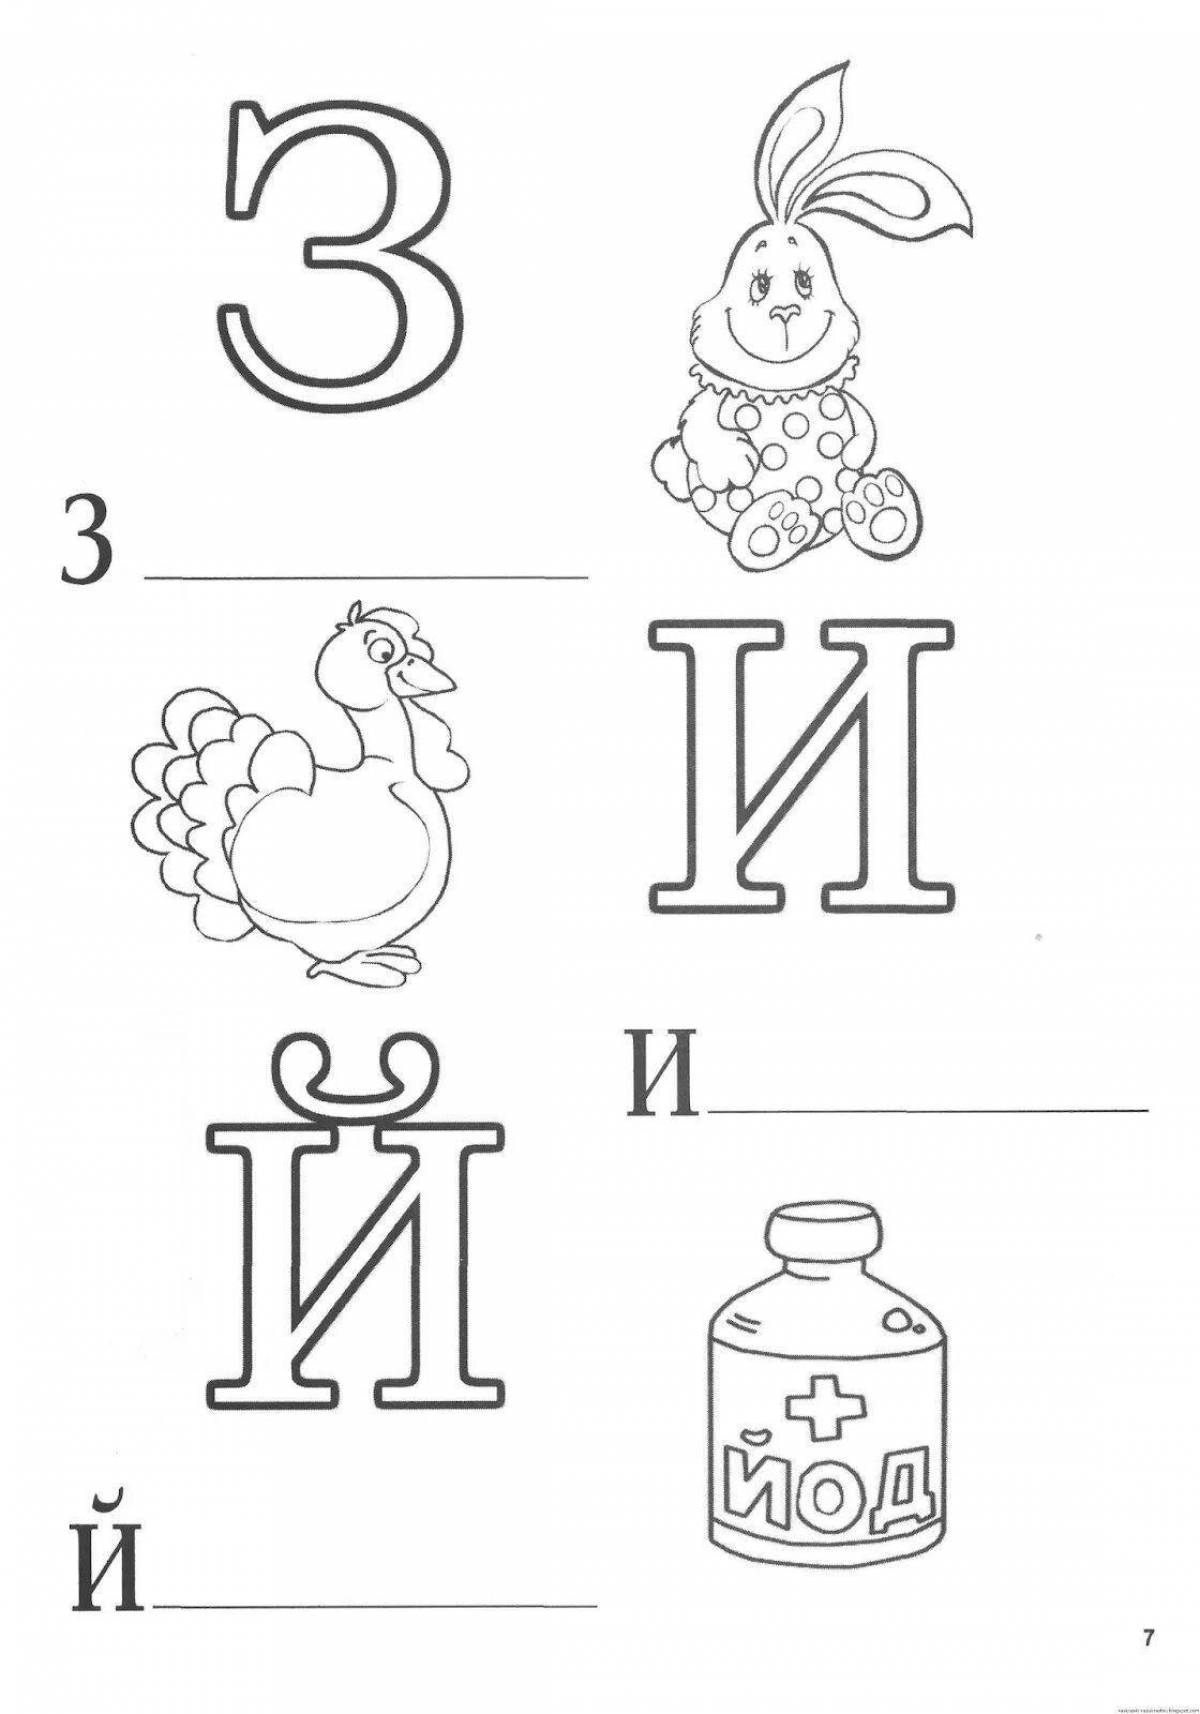 Colored funny coloring pages with letters for children 3-4 years old